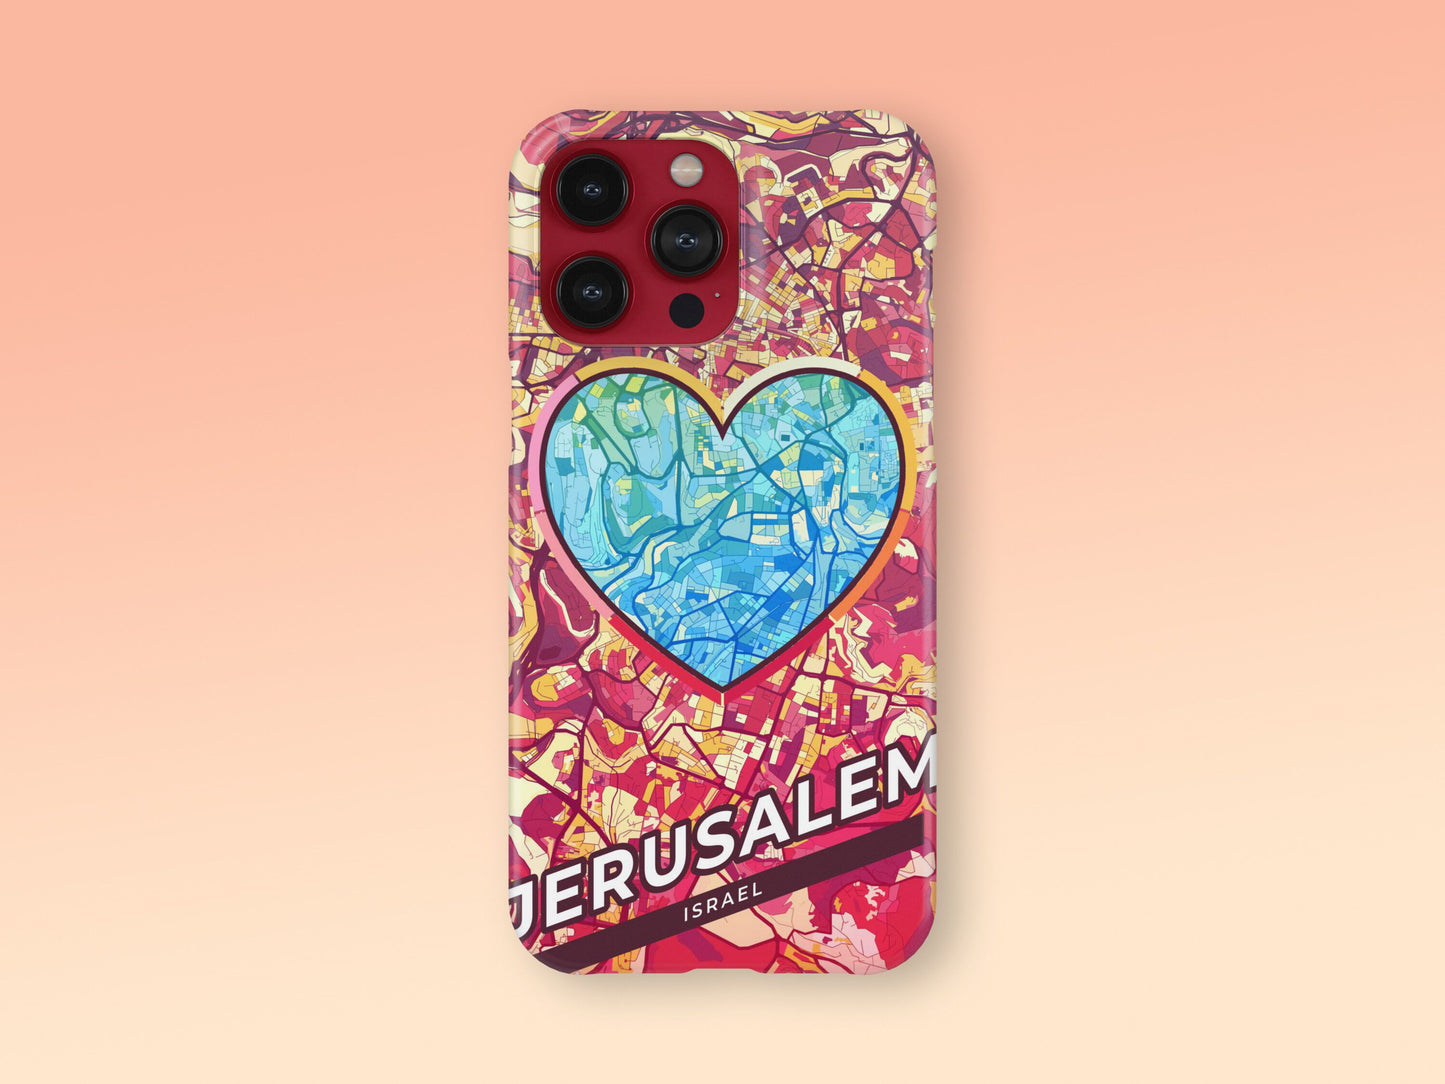 Jerusalem Israel slim phone case with colorful icon. Birthday, wedding or housewarming gift. Couple match cases. 2